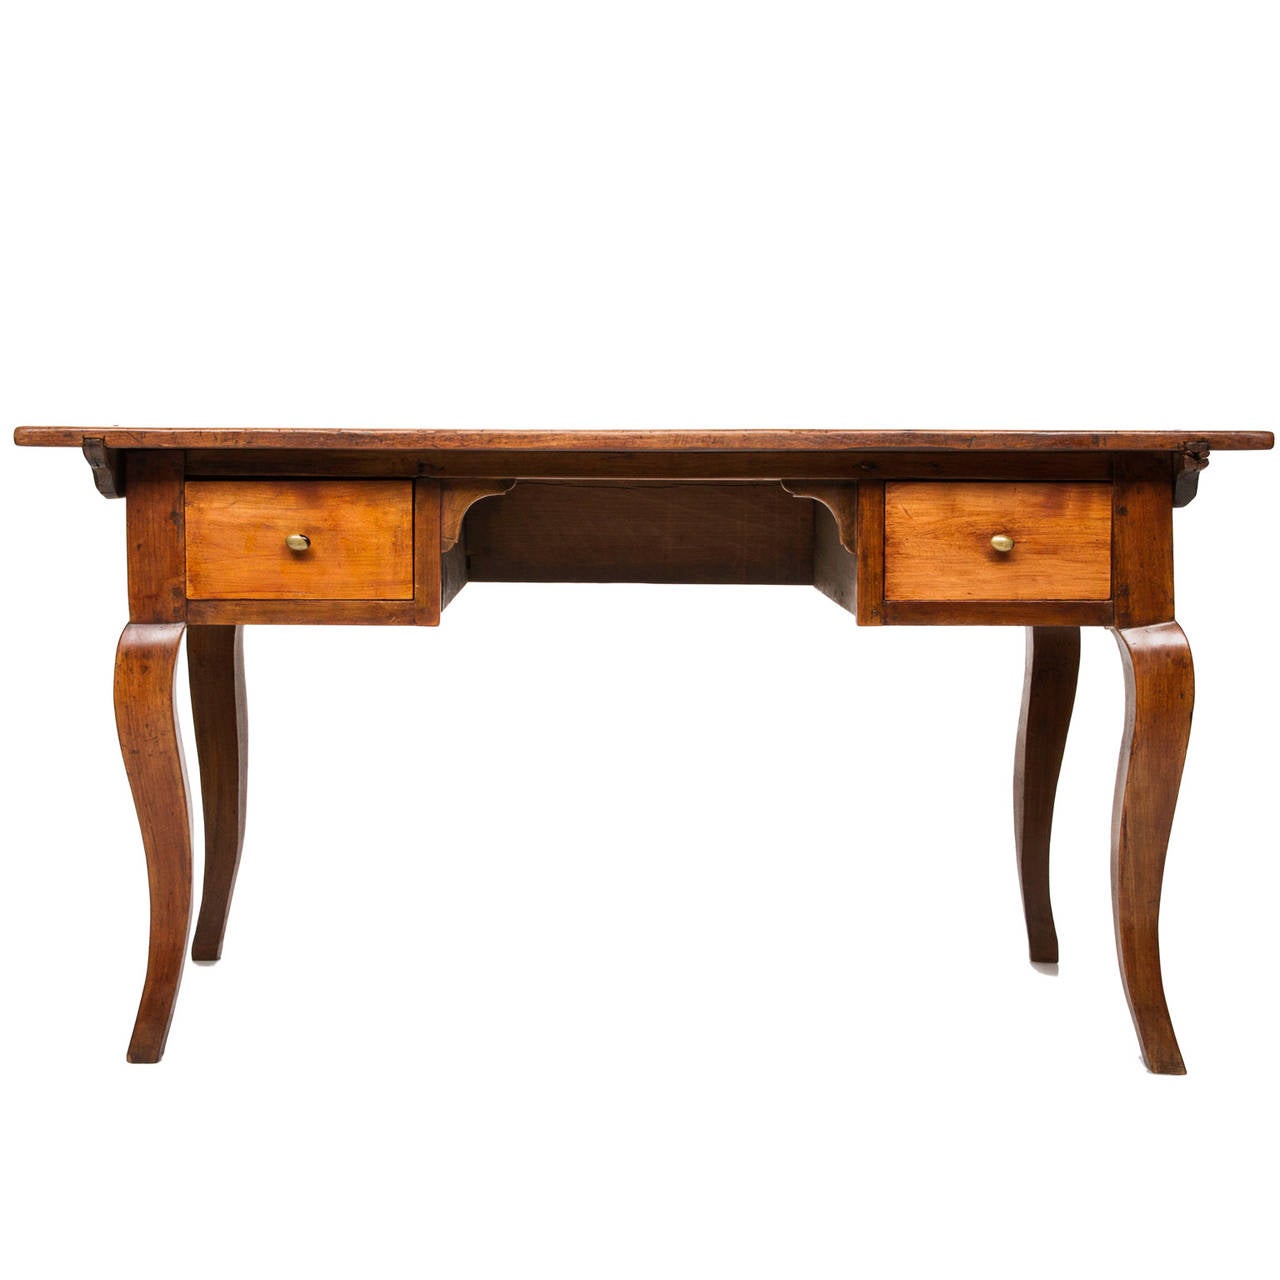 An early 19th century French Provincial bureau plat, having one drawer. This writing table has a warm brown and honey, worn oak color. The apron slightly shaped and having the one drawer with a Rococo pull. There are four cabriole legs with carved